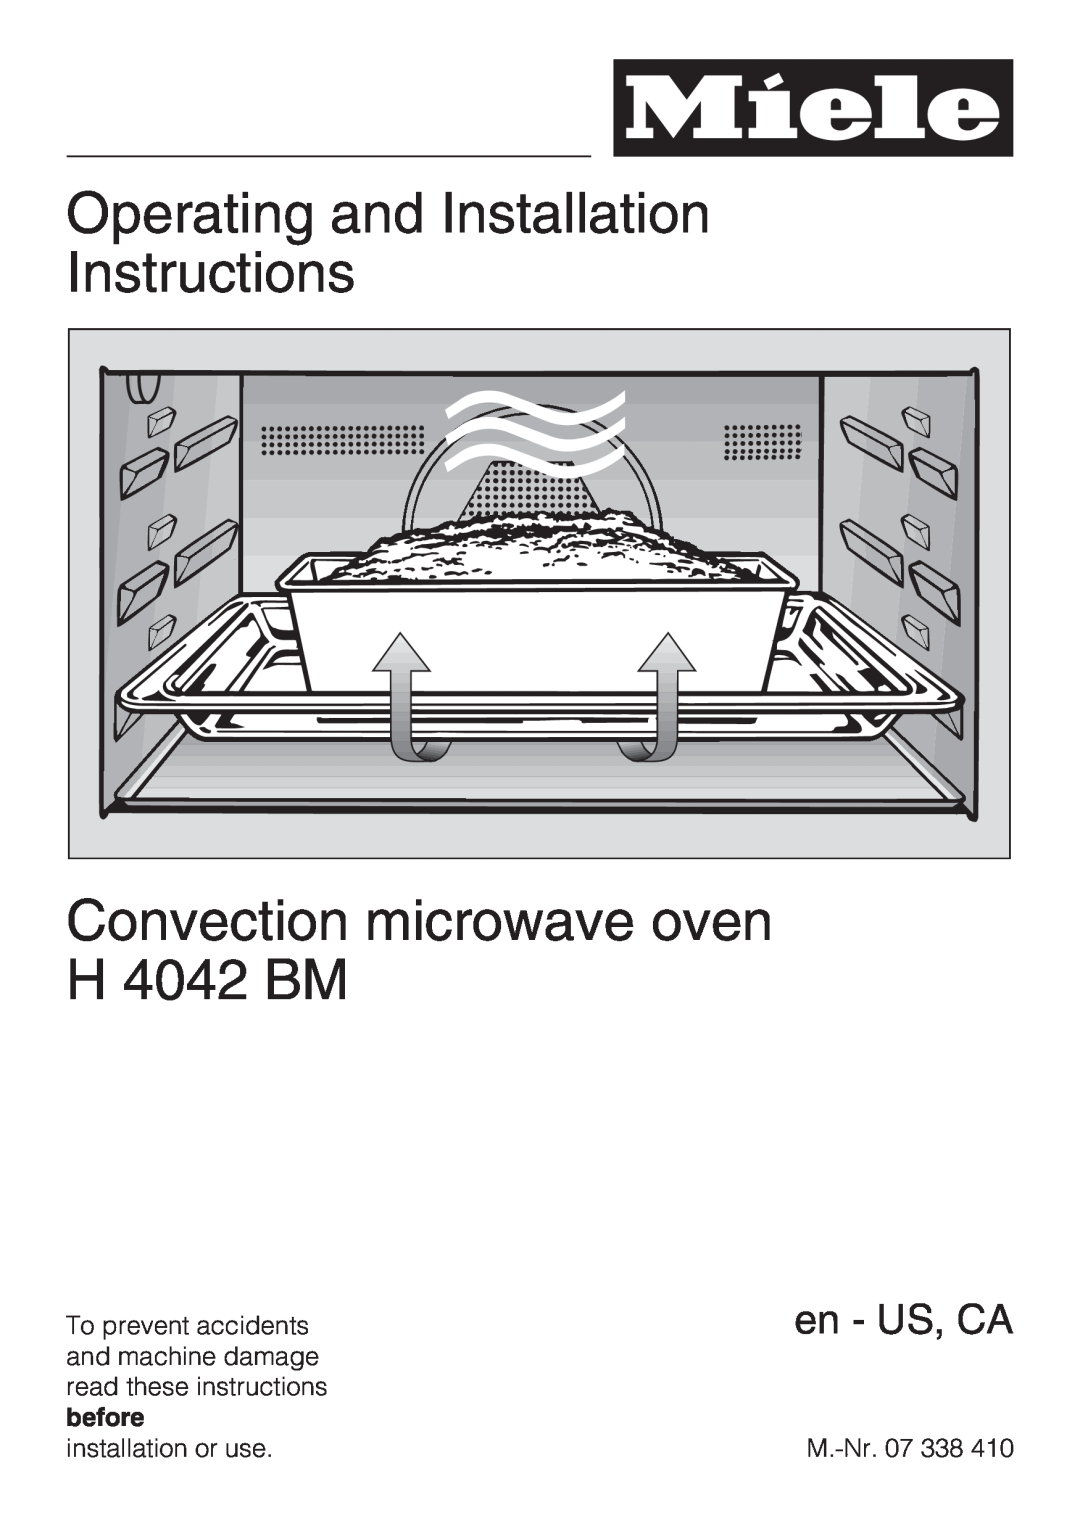 Miele installation instructions Operating and Installation, Instructions, Convection microwave oven H 4042 BM 